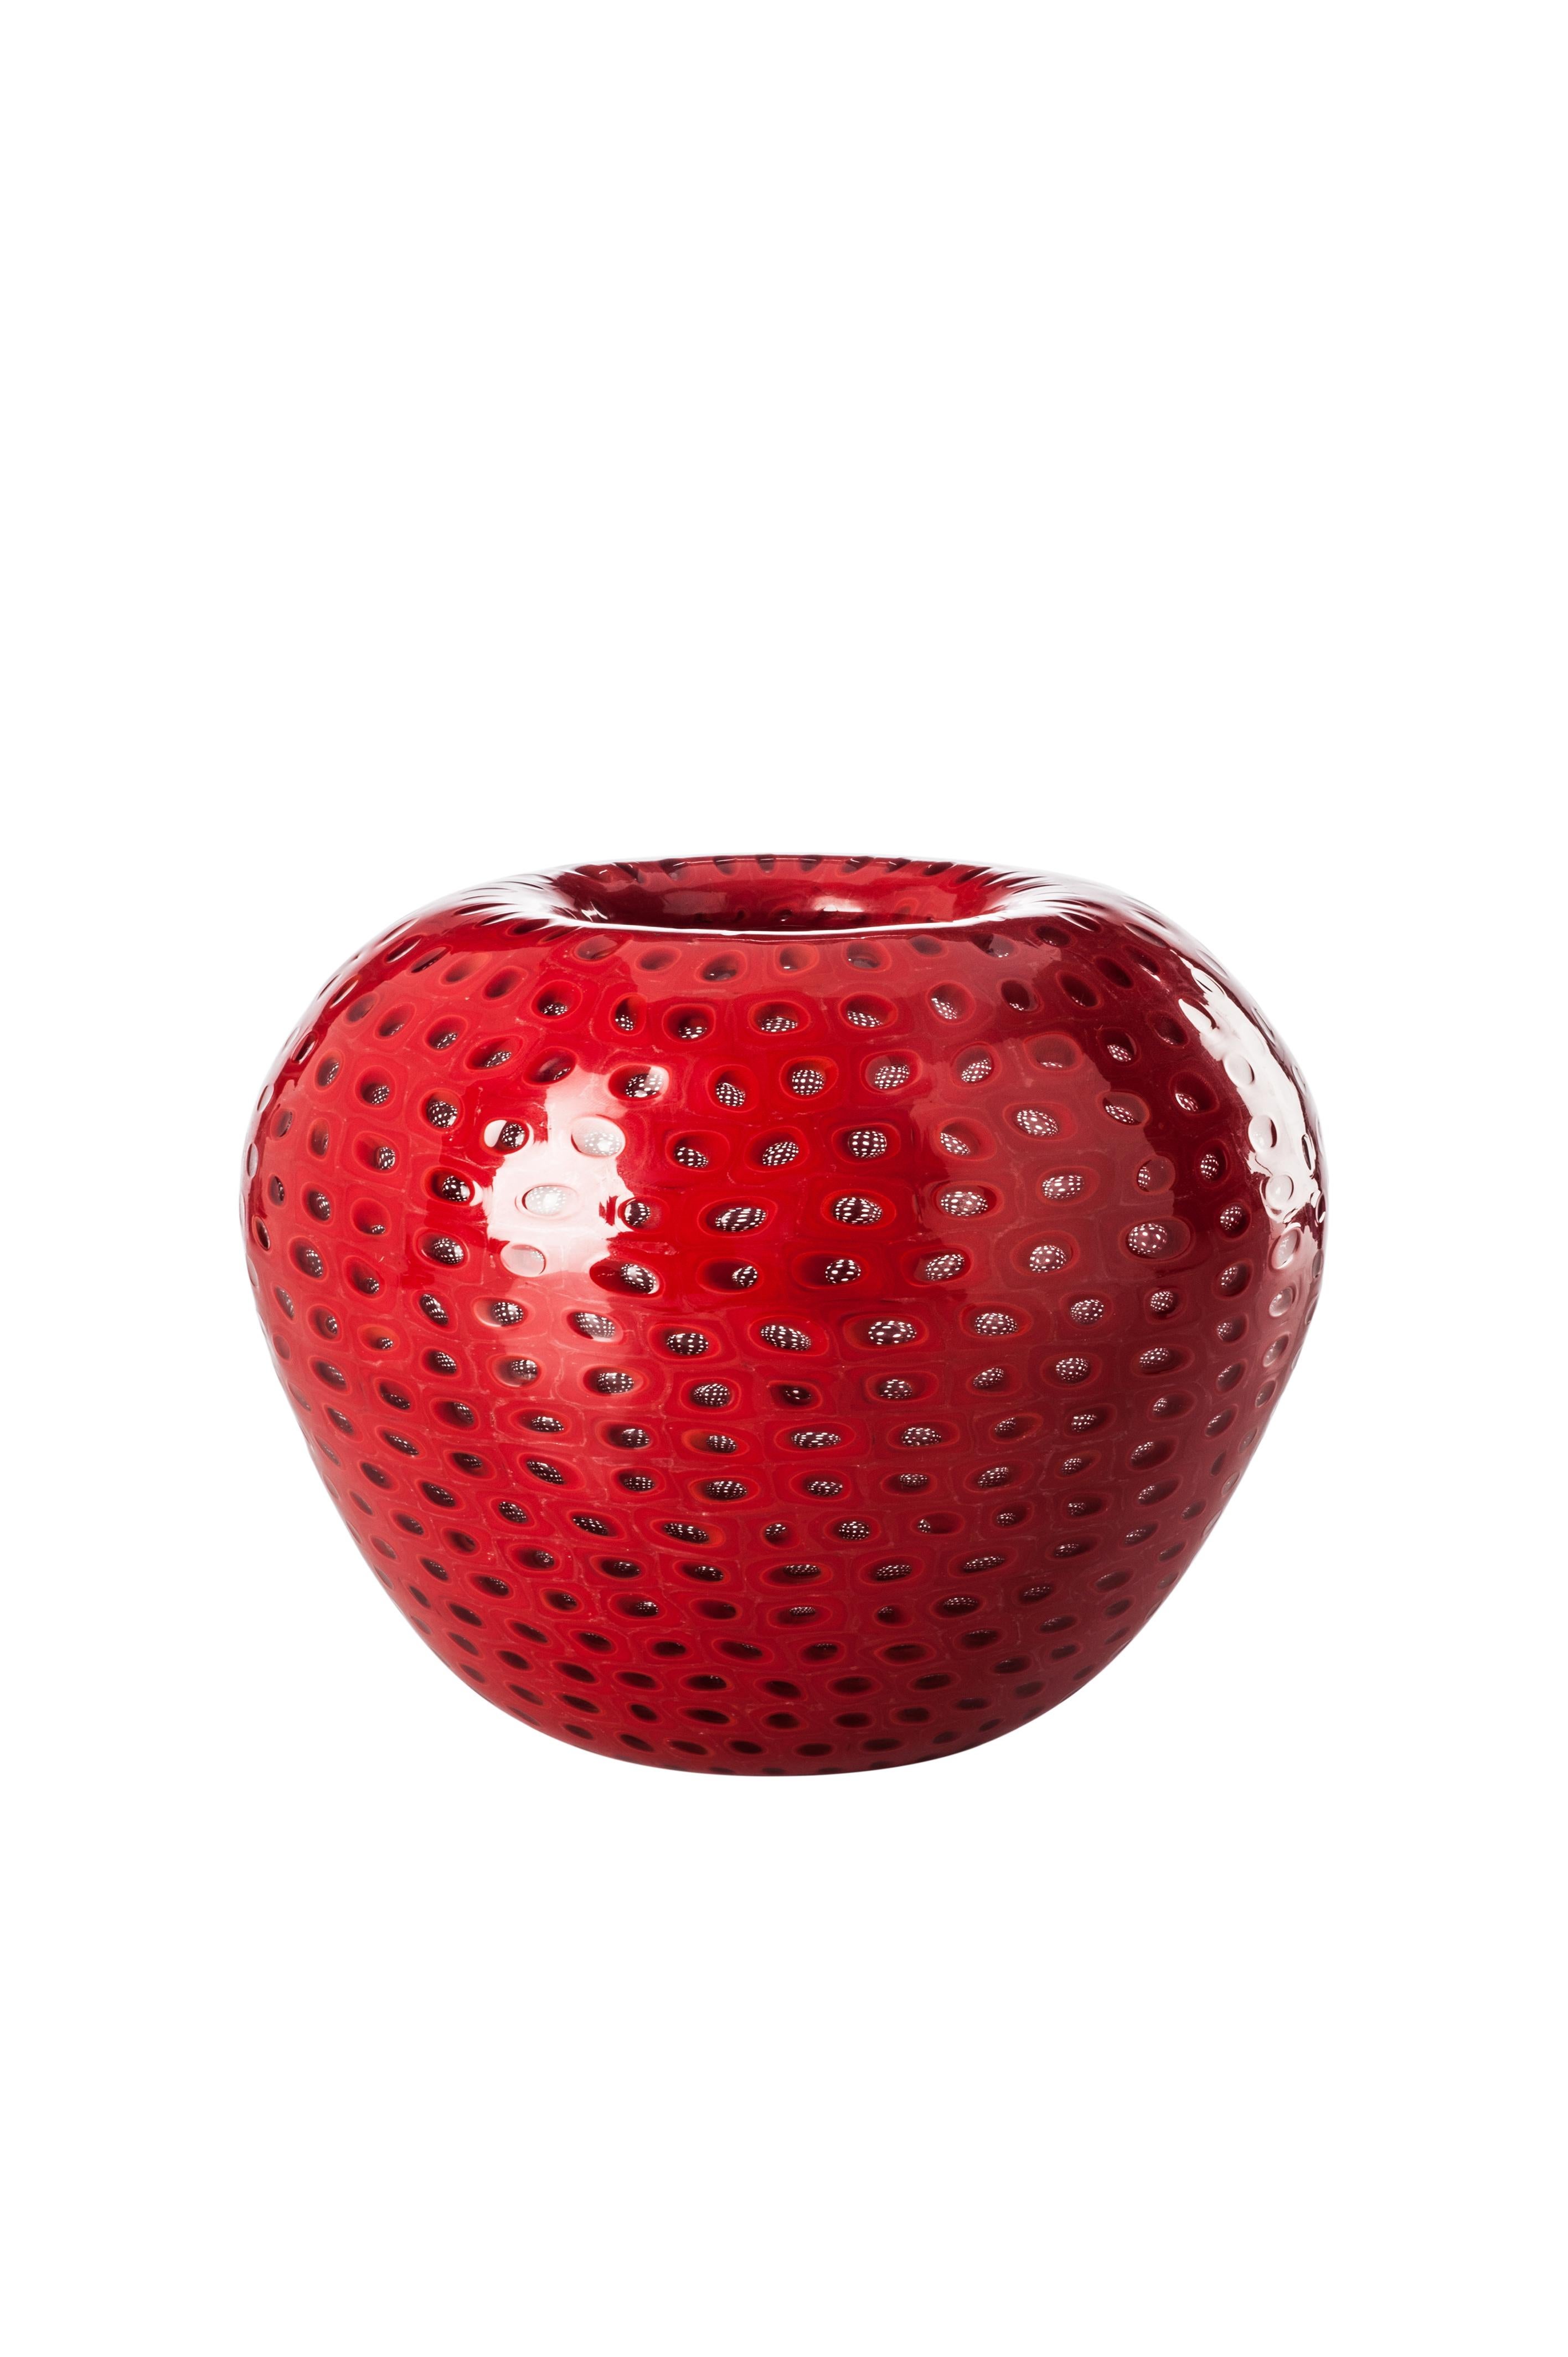 Venini glass vase with round body in coral red and spotted, textured surface by Ettore Sottsass in 2001. Perfect for indoor home decor as container or strong statement piece for any room. Limited production of only 99 pieces.

Dimensions: 21.5 cm